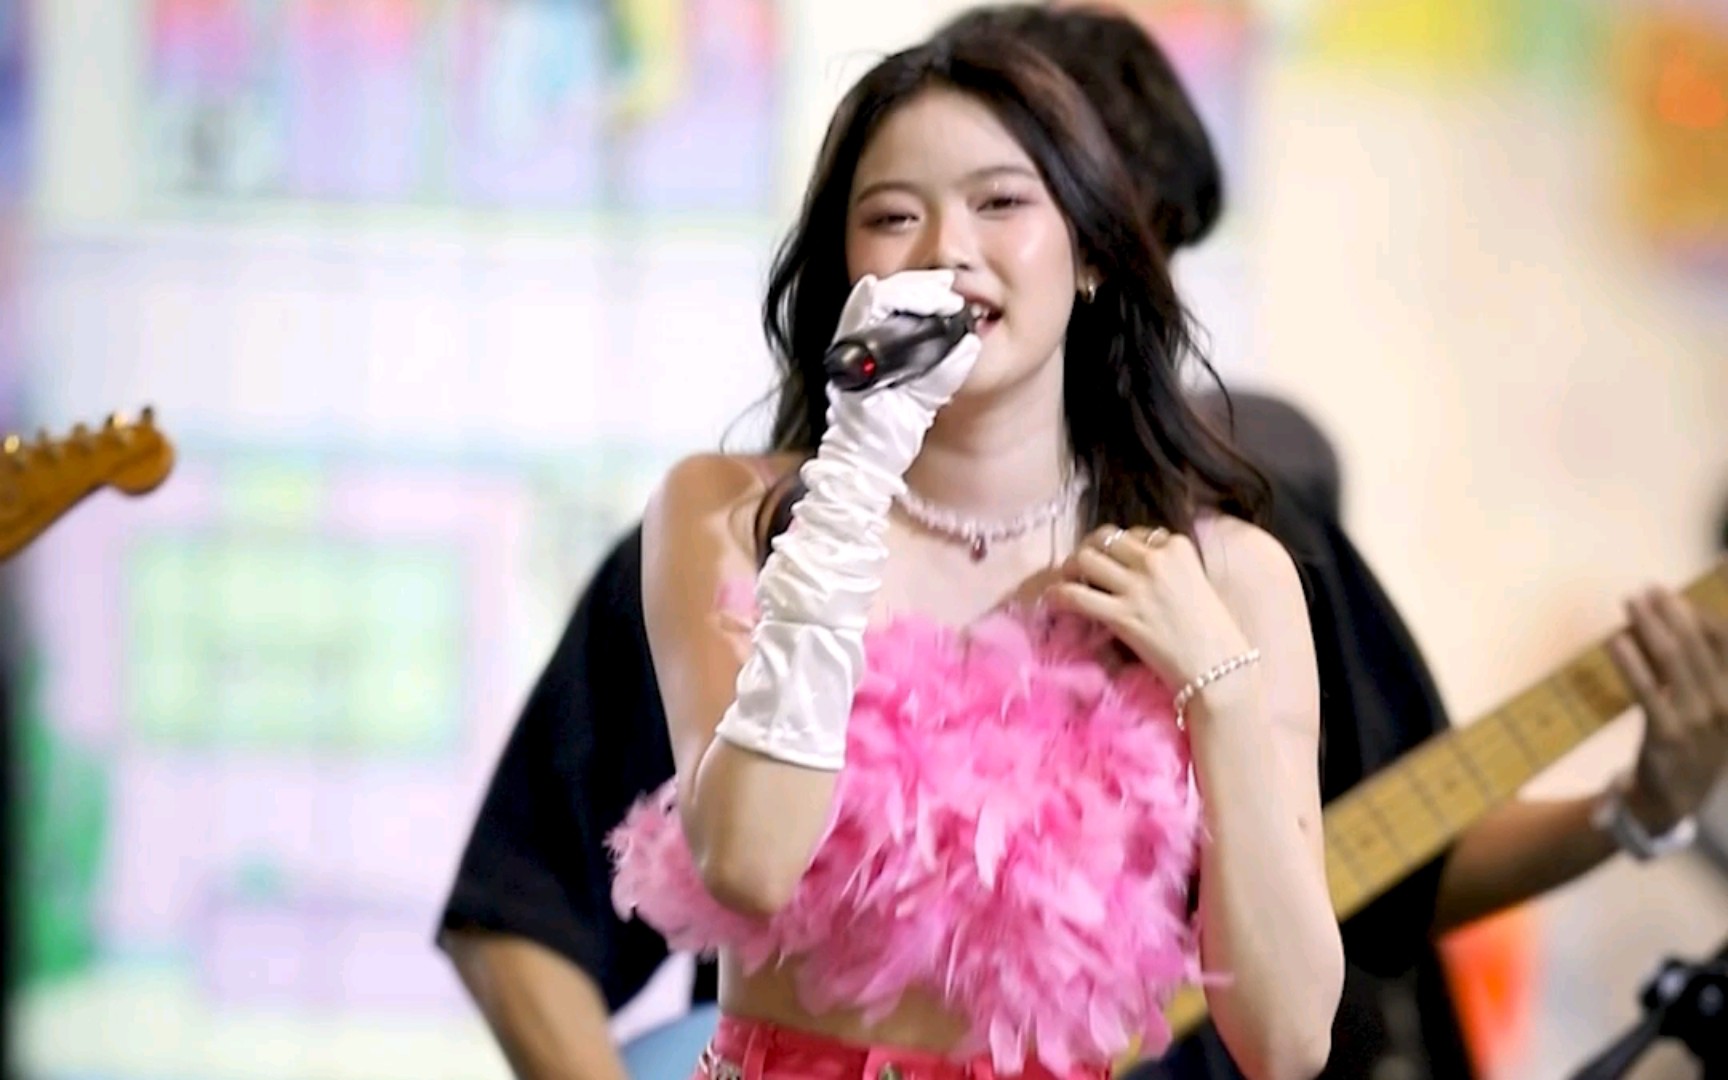 [Mabelz] PiXXiE - AirTag ใจหายอ่ะ สงสัยอยู่ที่เธอ @All About Art Mark 2022.08.06